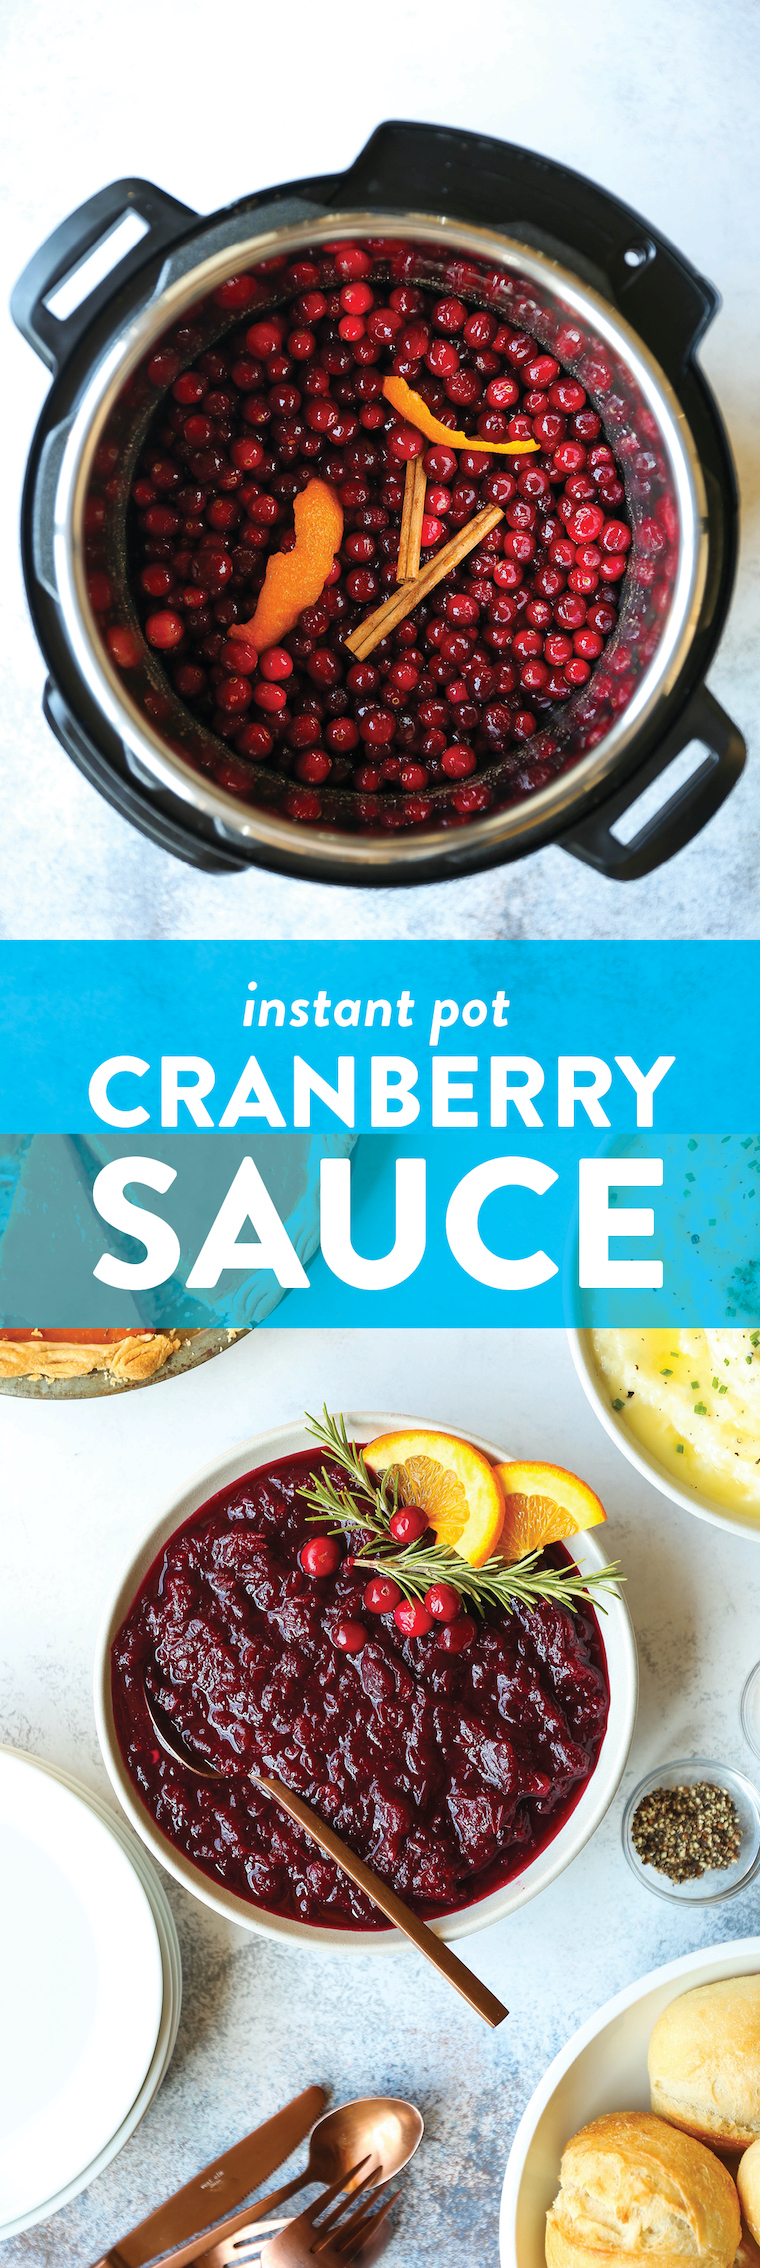 Instant Pot Cranberry Sauce - Perfect homemade 4 min cranberry sauce made from scratch! Use frozen or fresh cranberries. Quick, simple, easy, and so good.